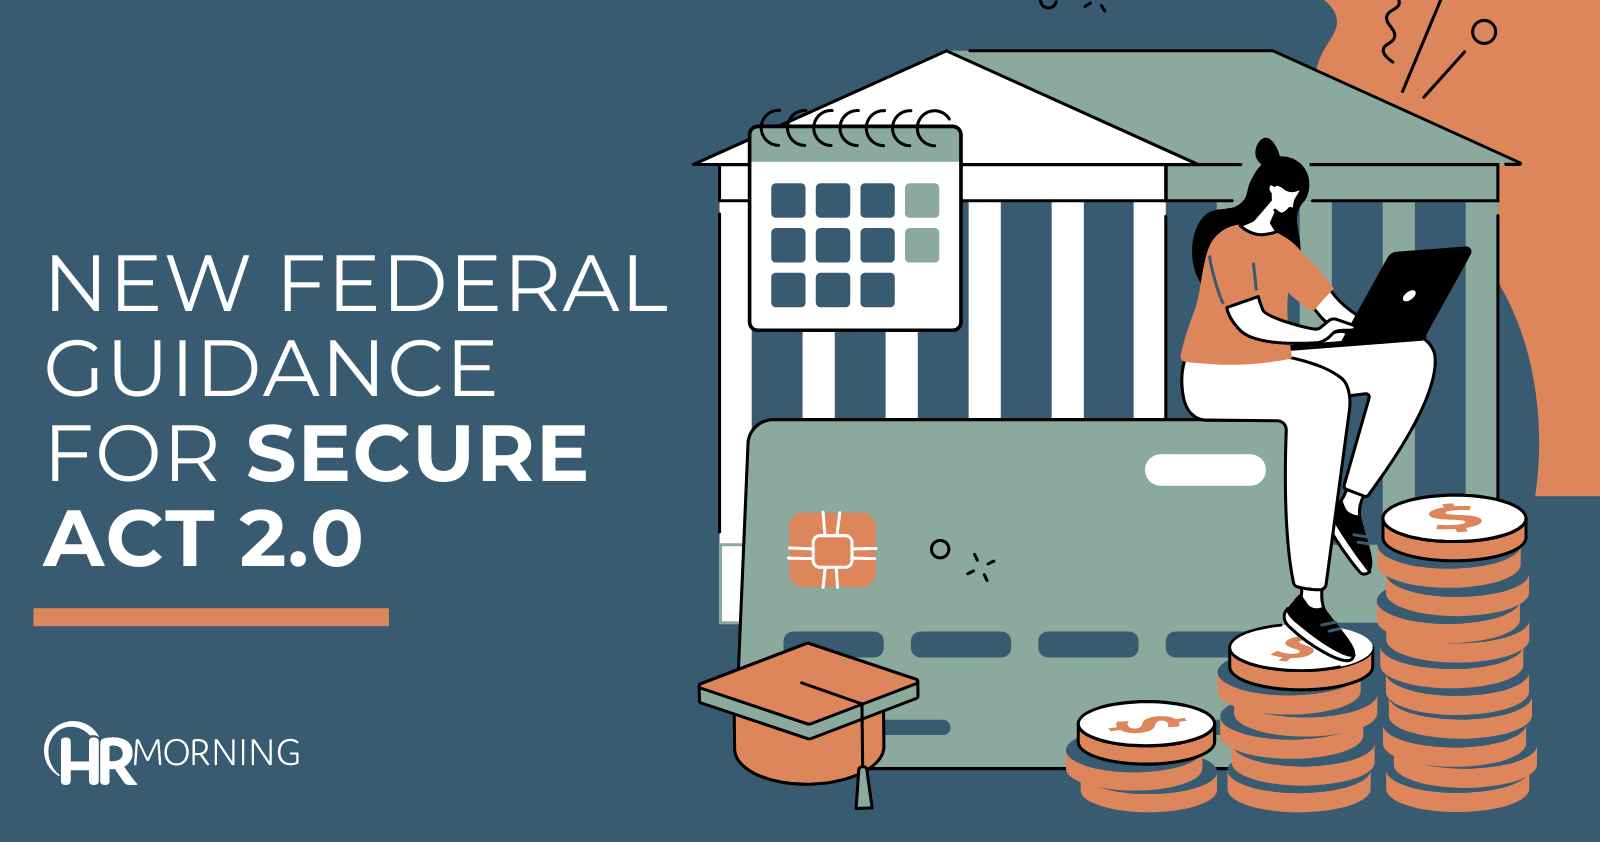 New federal guidance for SECURE Act 2.0